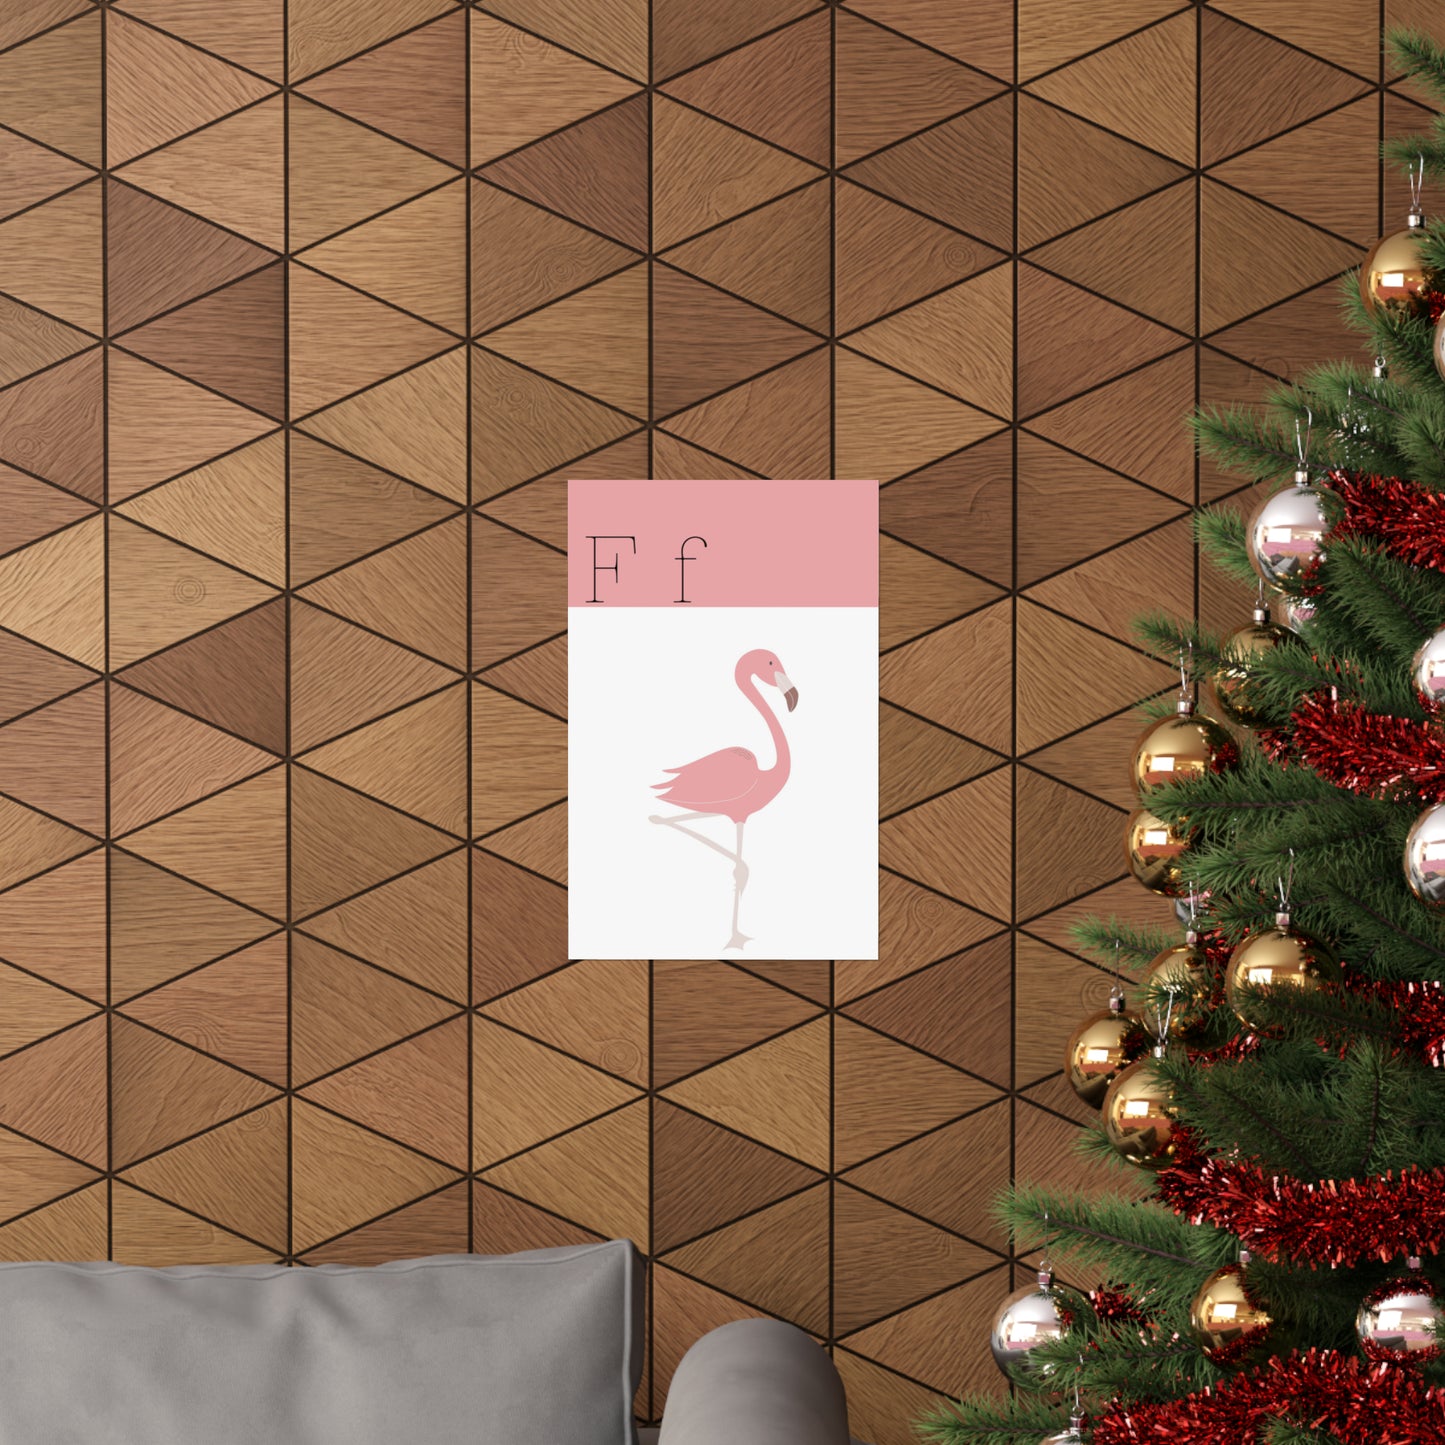 Flamingo Poster On Wooden Wall Beside a Christmas Tree